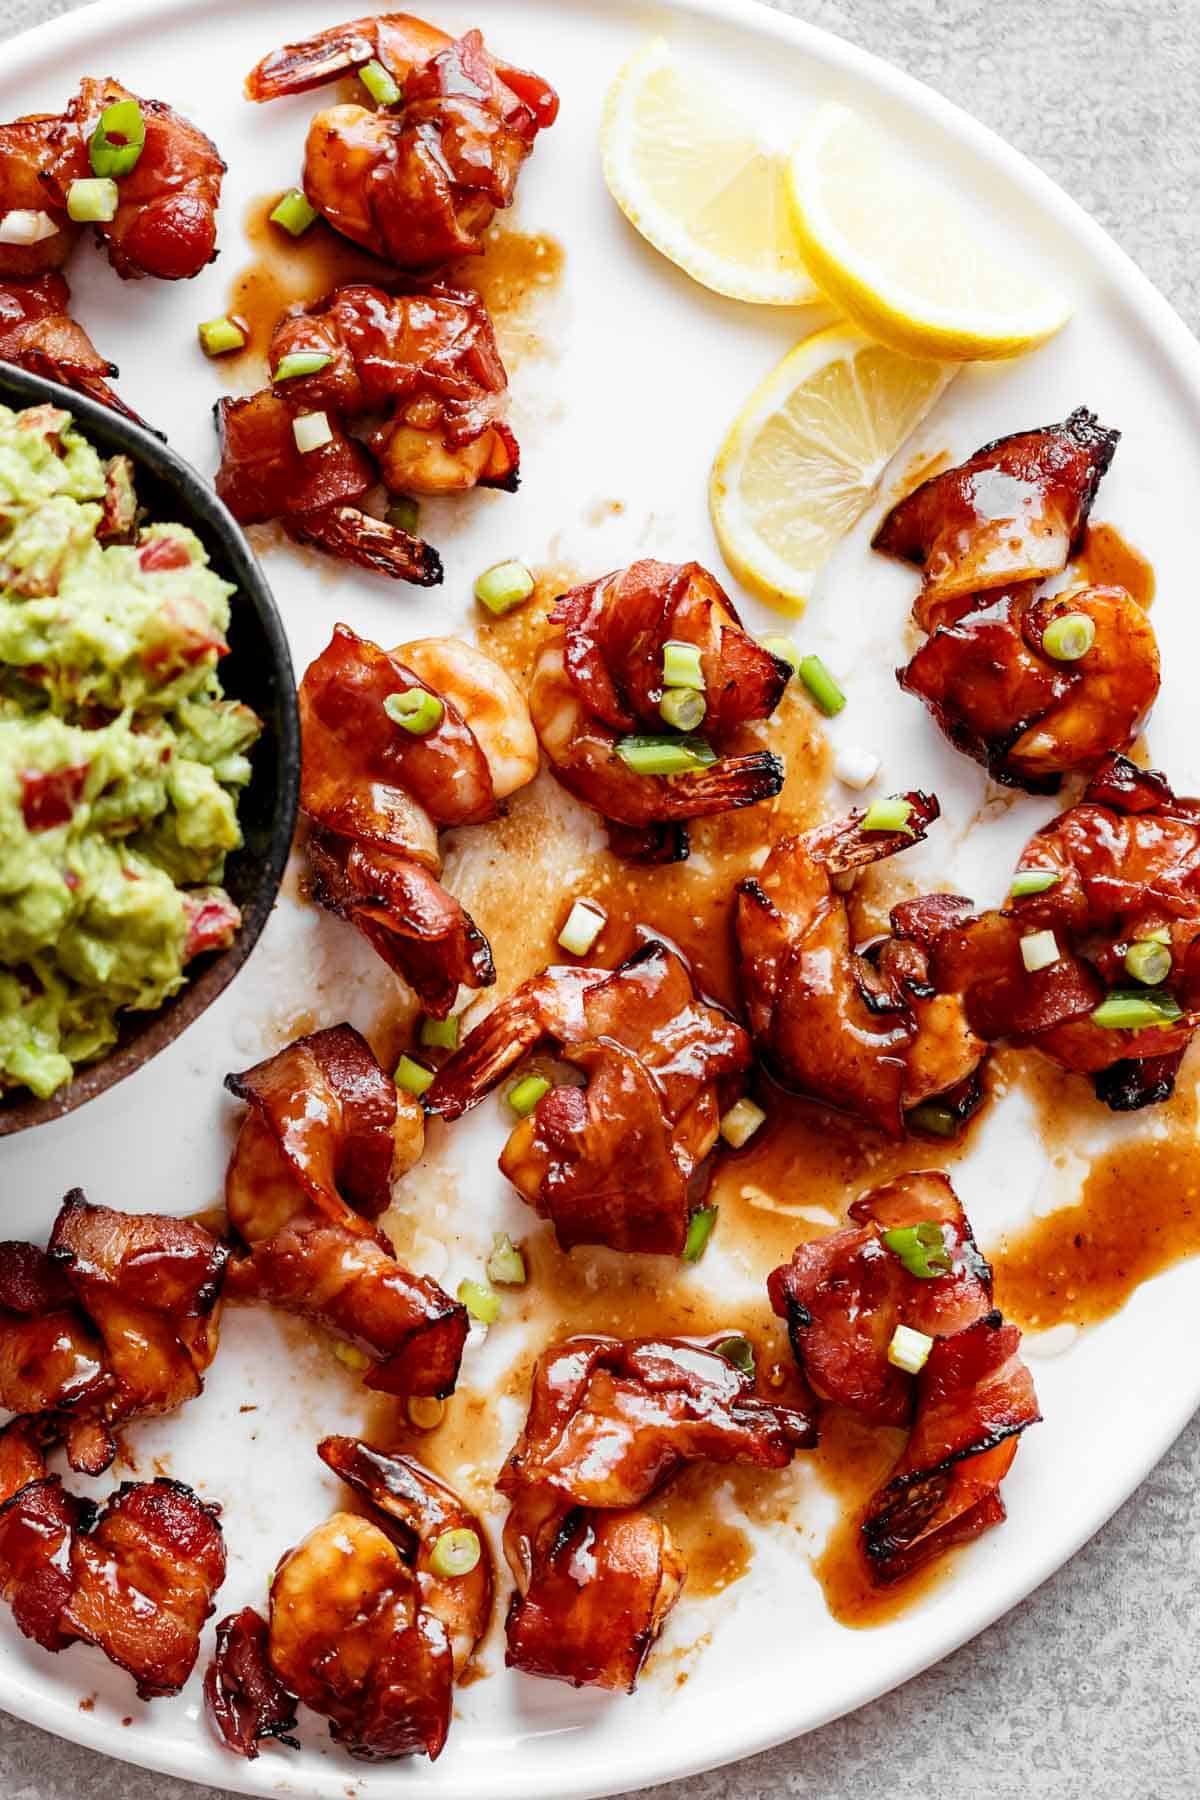 Crispy Bacon Wrapped Shrimp drizzled in an irresistible sticky Honey Garlic Sauce makes the perfect appetizer for any special occasion! | cafedelites.com